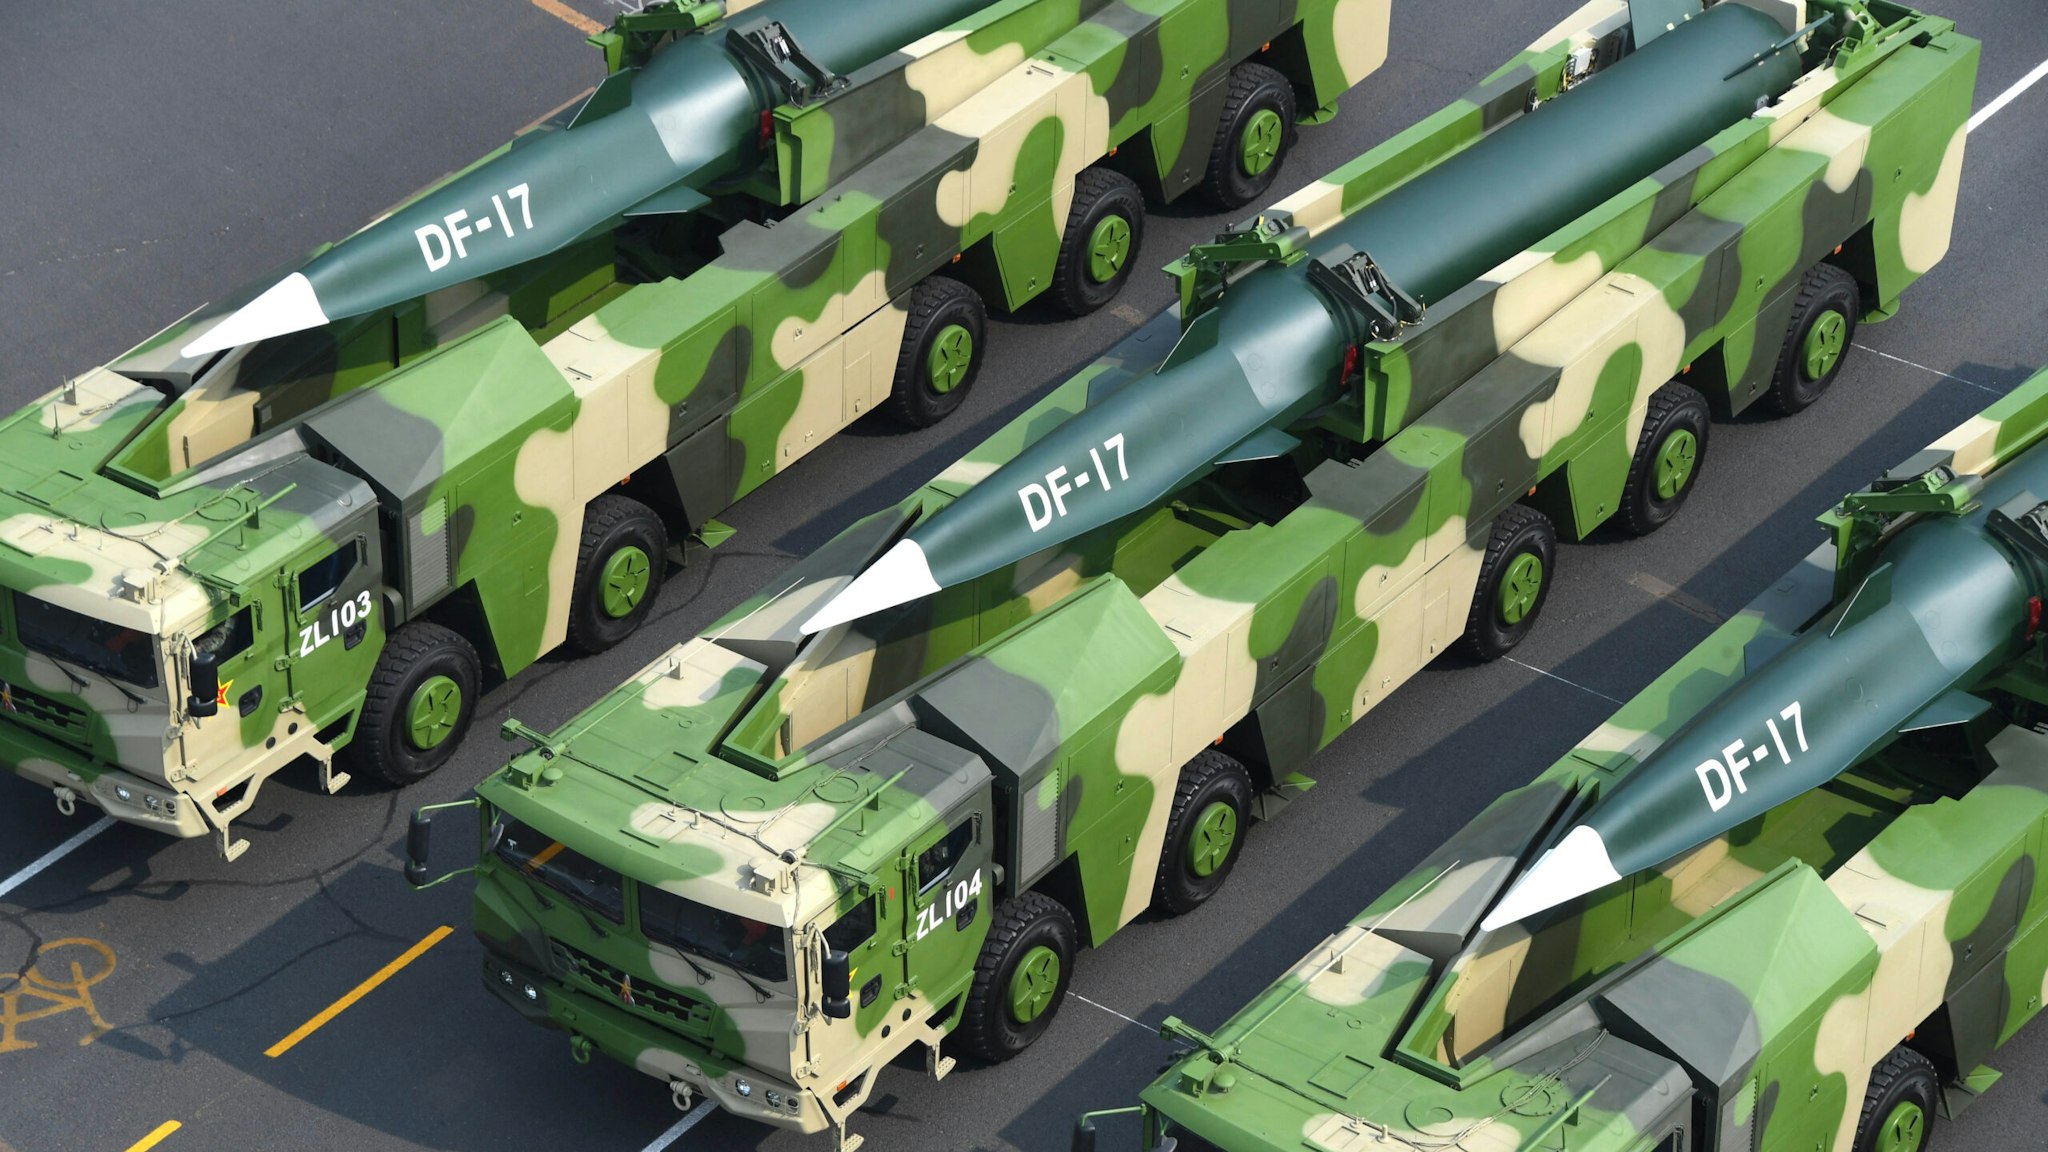 BEIJING, Oct. 1, 2019 -- A formation of Dongfeng-17 conventional missiles attends a military parade during the celebrations marking the 70th anniversary of the founding of the People's Republic of China in Beijing, capital of China, Oct. 1, 2019.